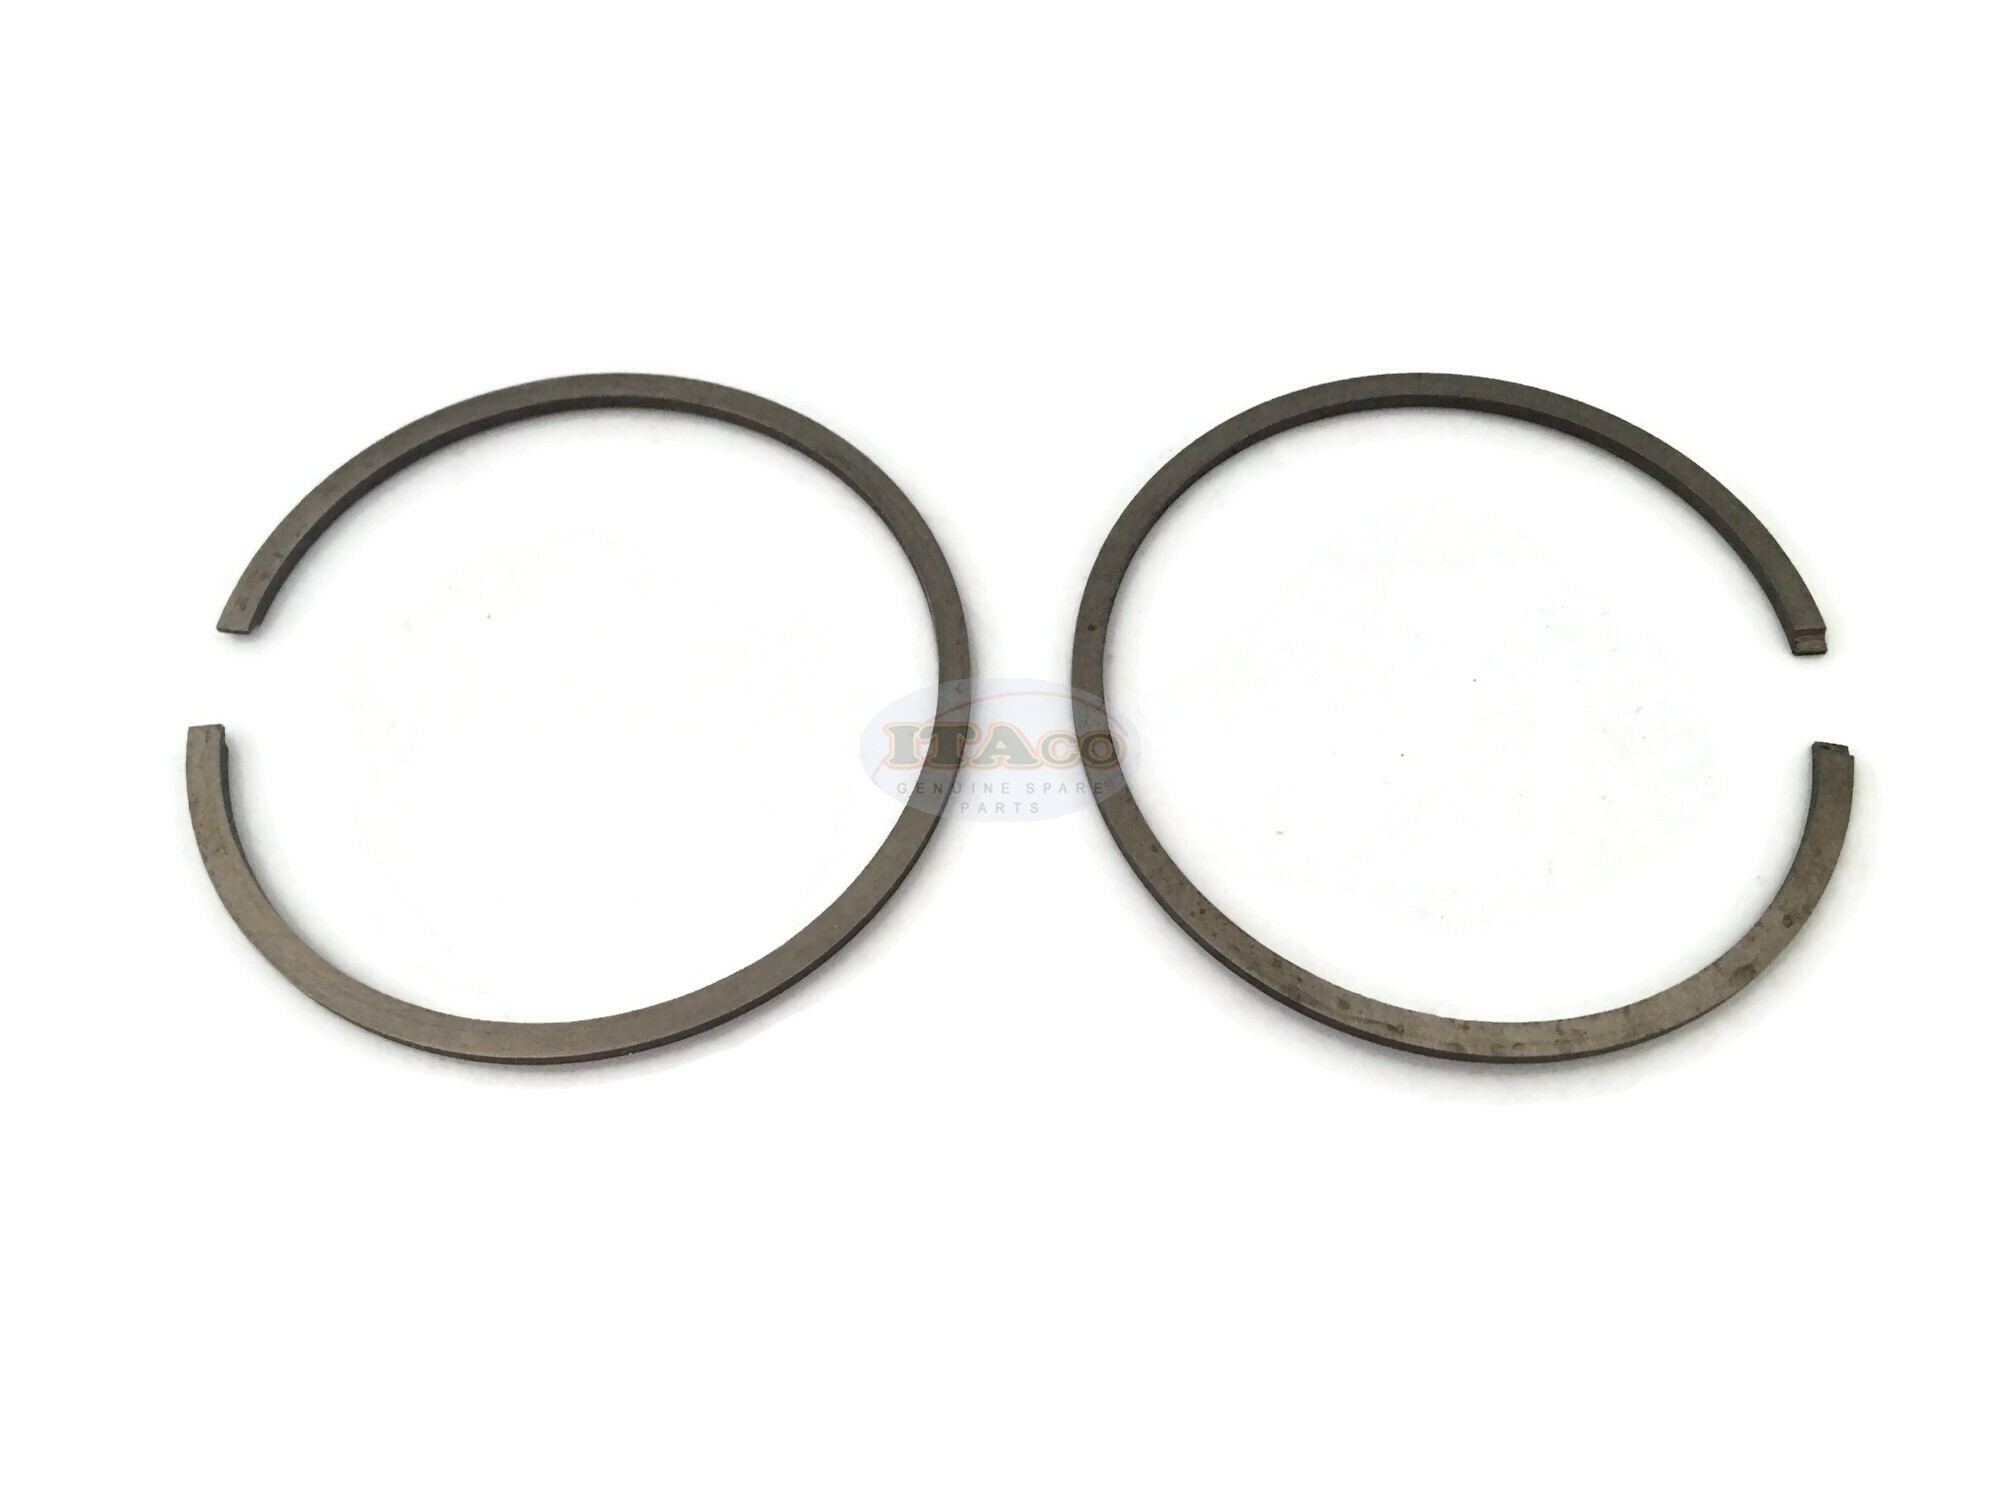 Piston Ring 52mm X 1.5mm for Stihl MS380 Husqvarna and others Various Stihl